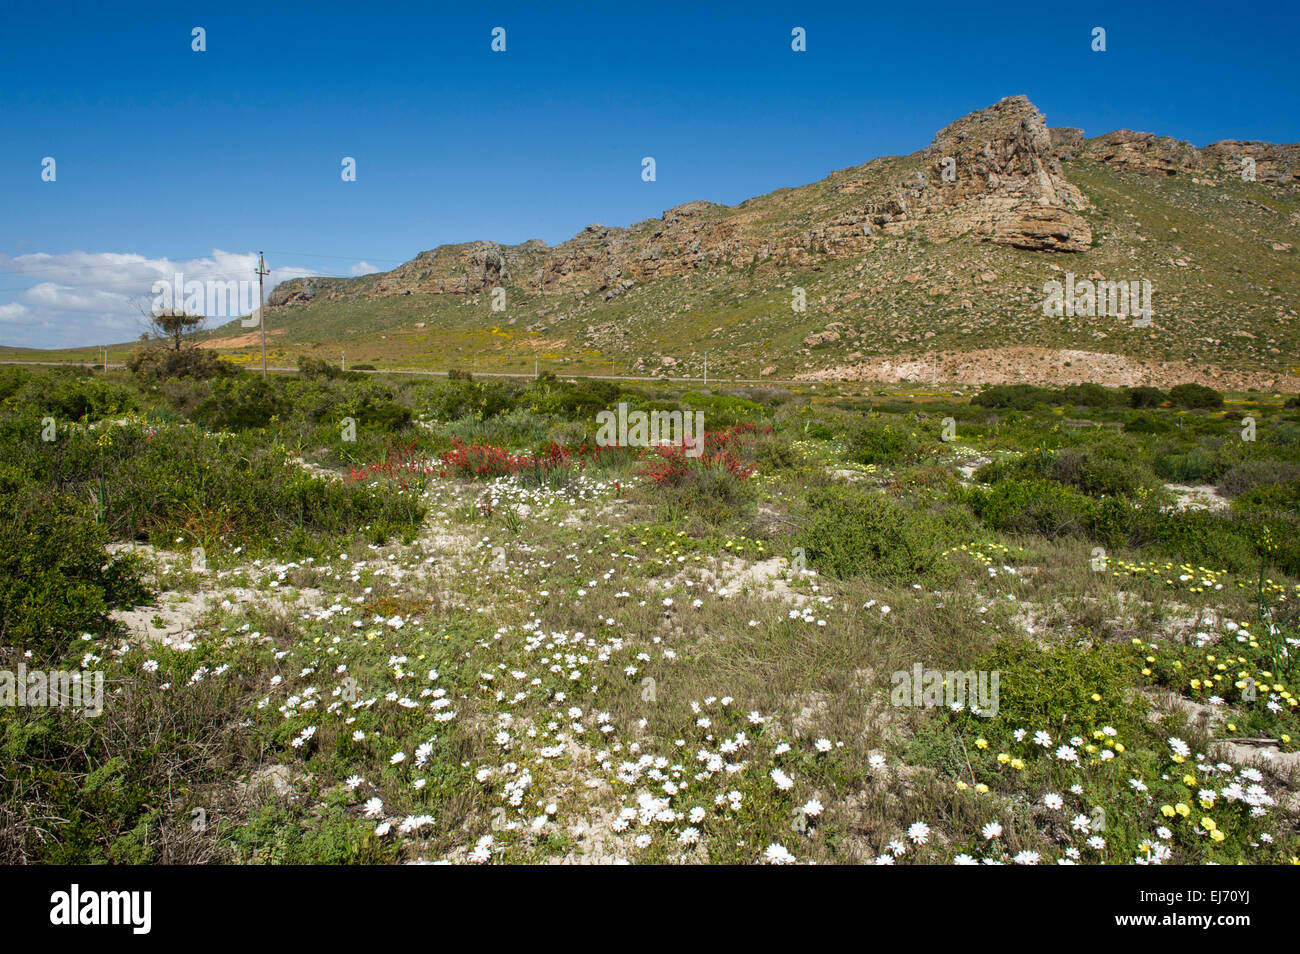 Scenery, Elands Bay, South Africa Stock Photo